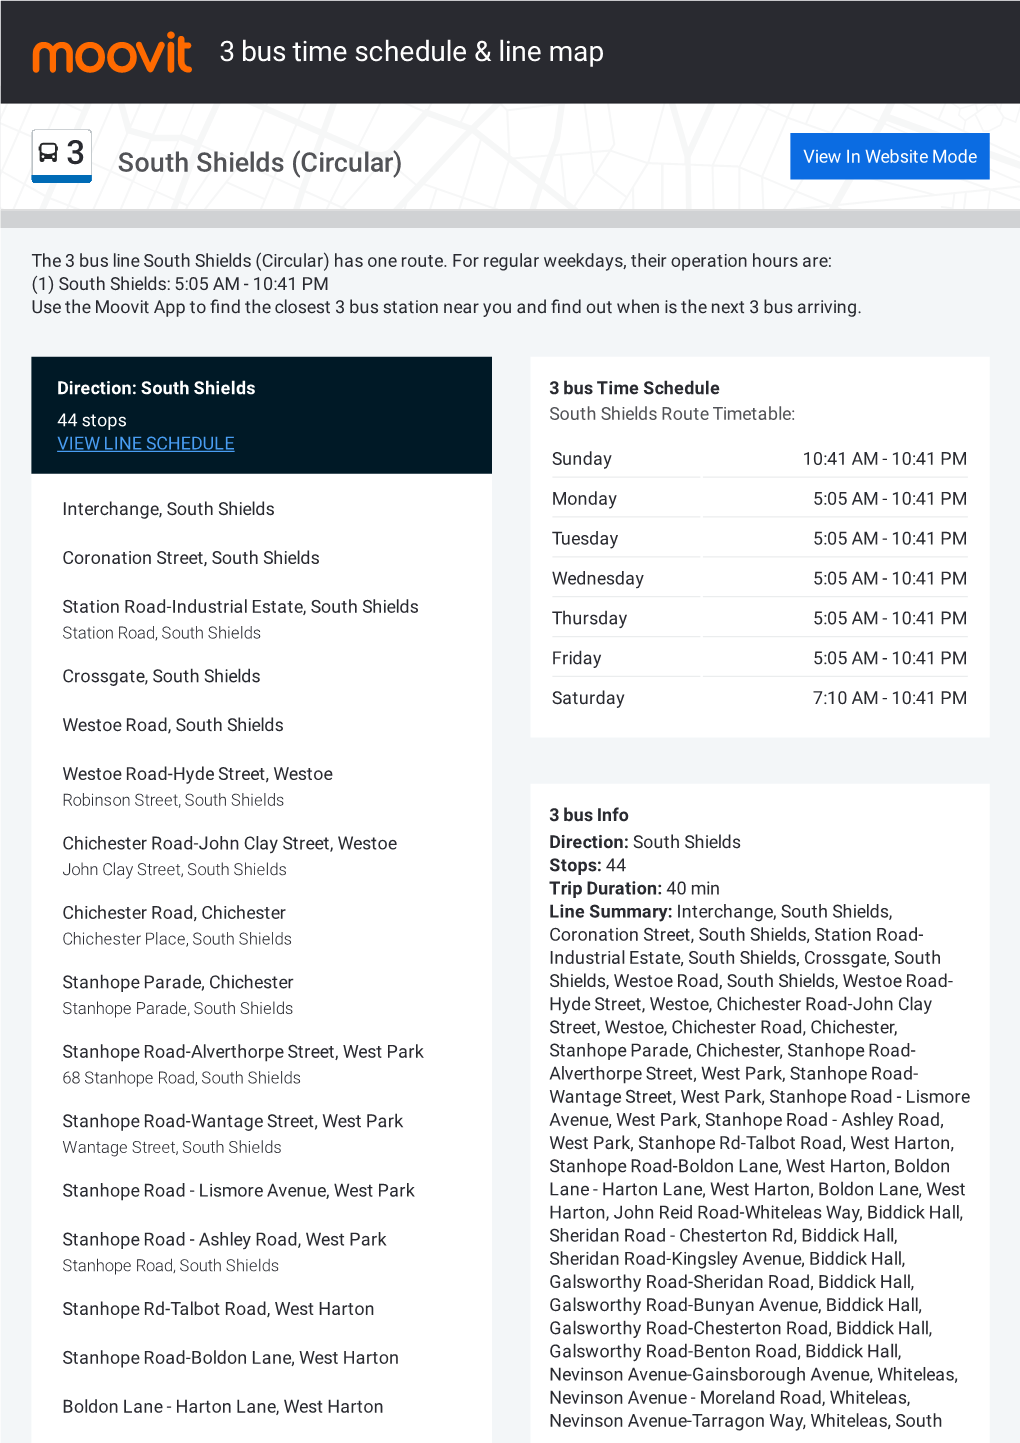 3 Bus Time Schedule & Line Route